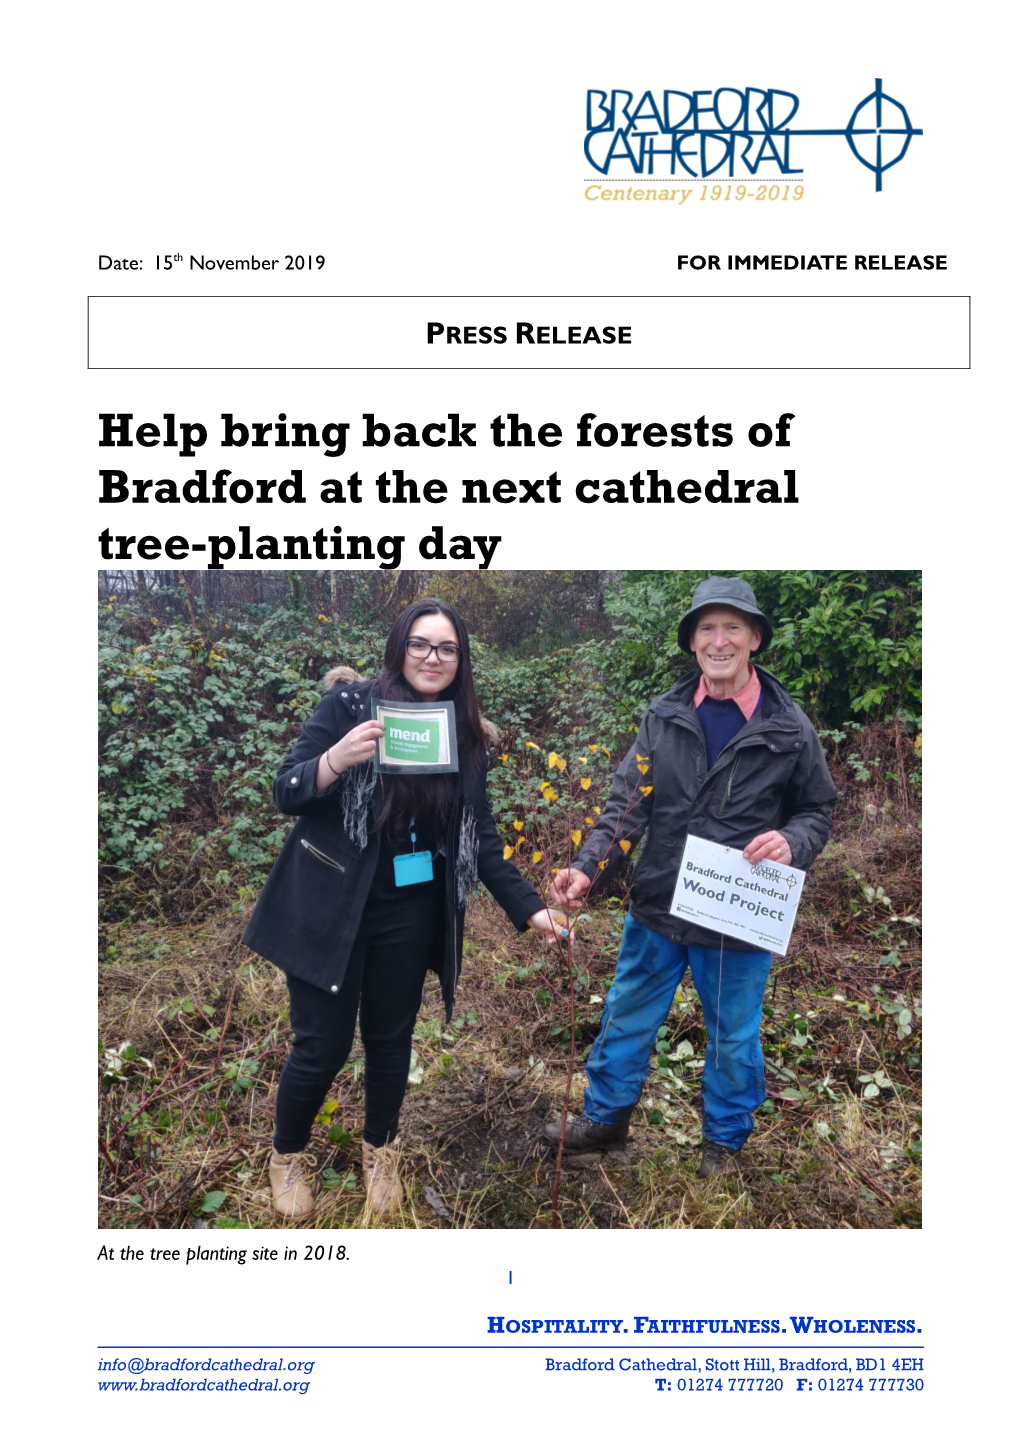 Help Bring Back the Forests of Bradford at the Next Cathedral Tree-Planting Day